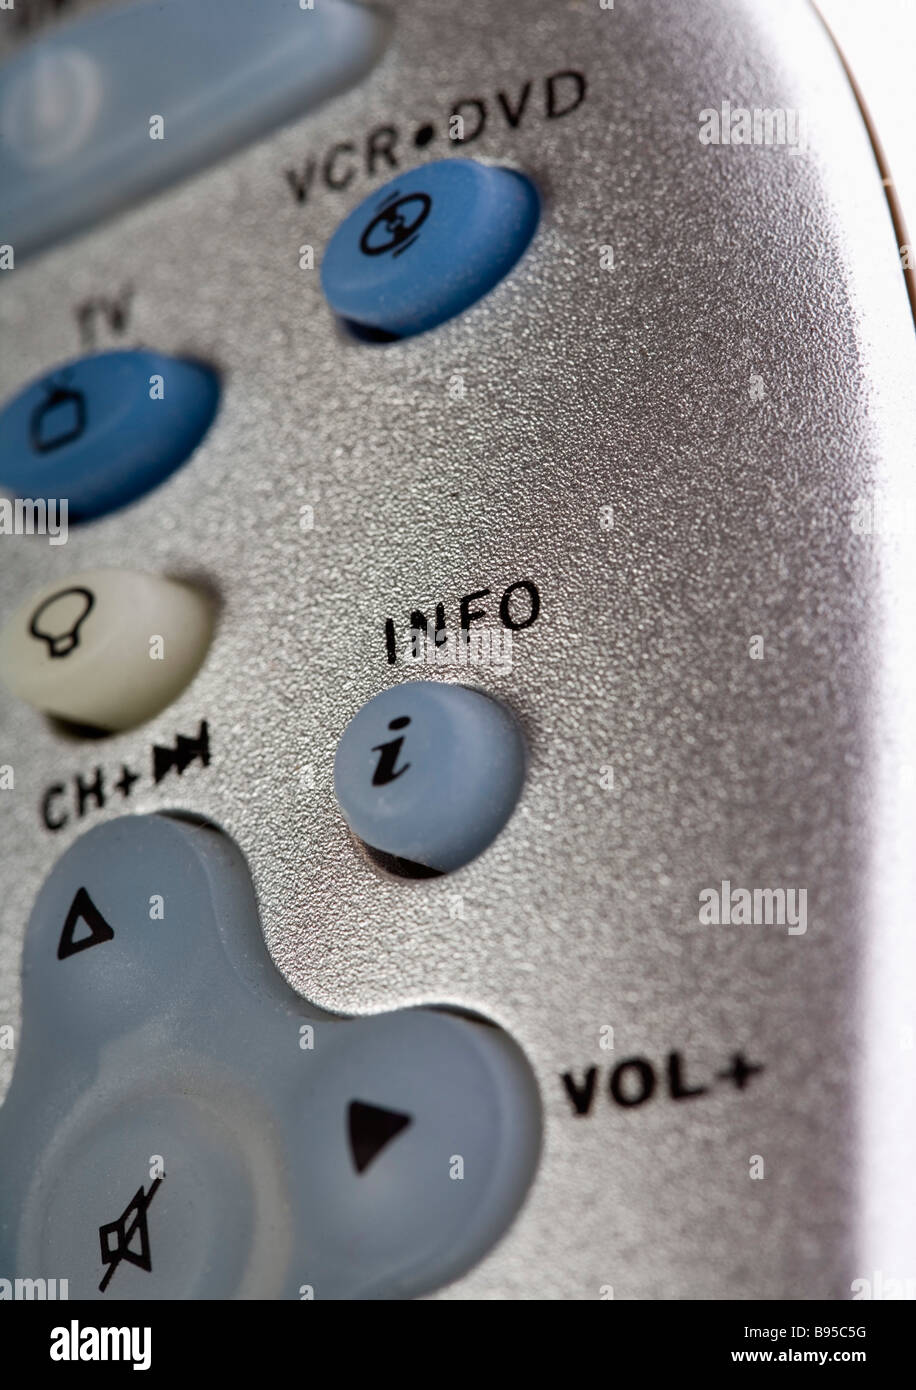 The info button on a remote control Stock Photo